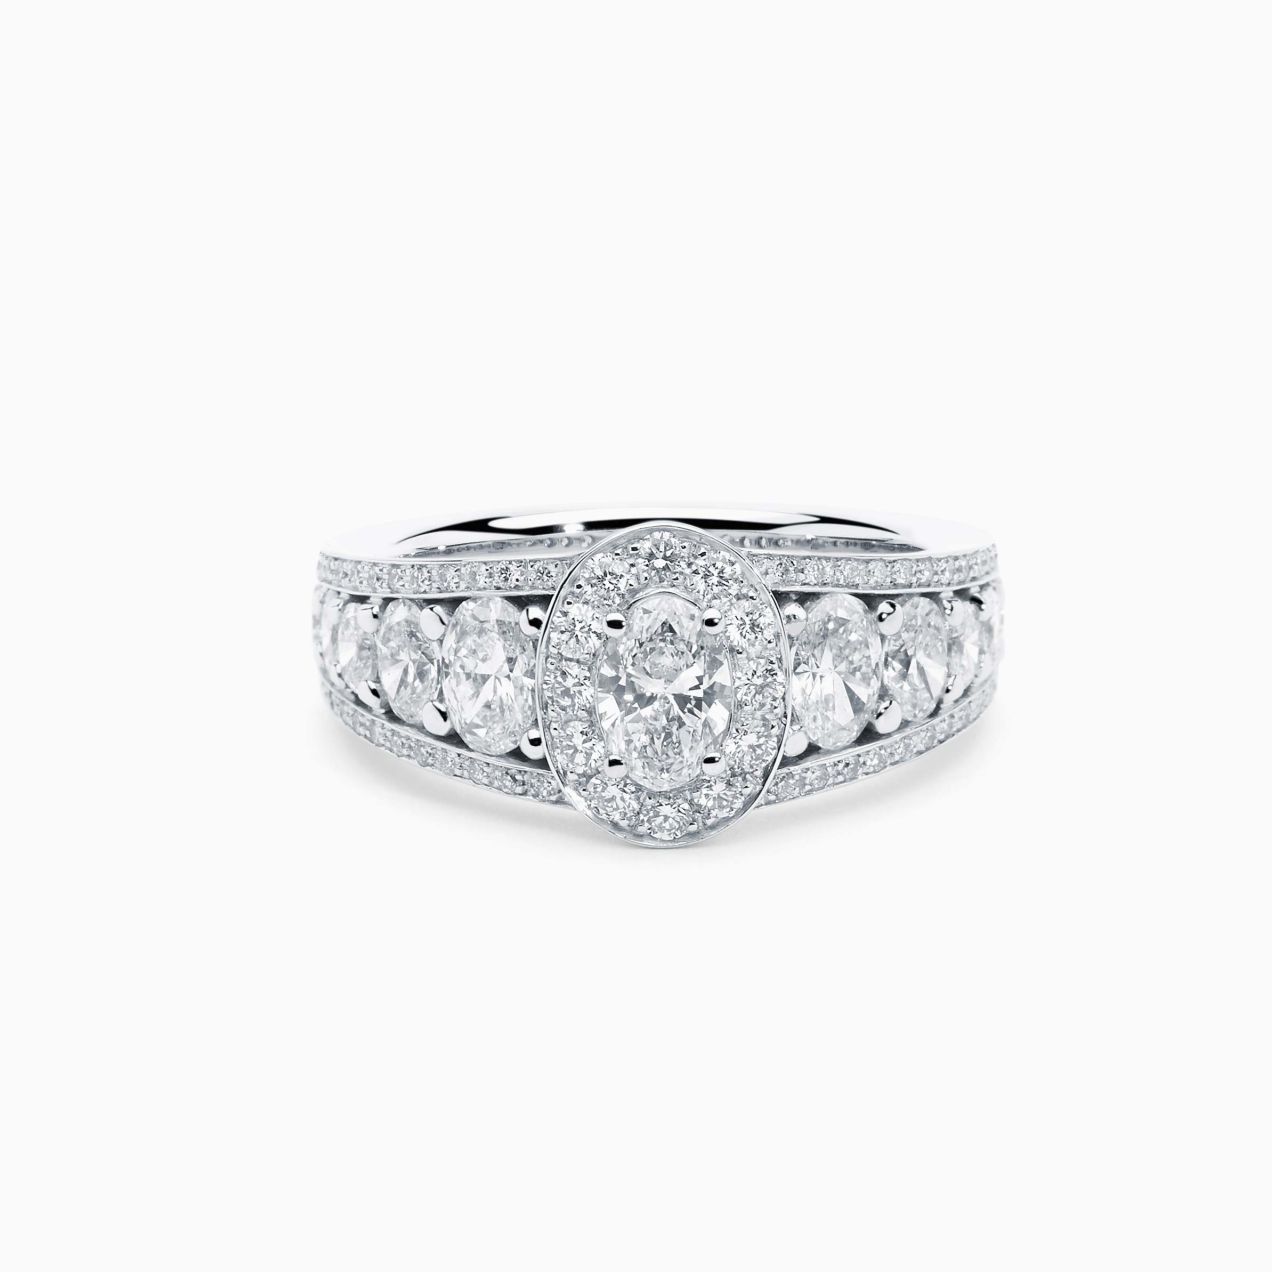 White gold with an oval diamond in the center ring